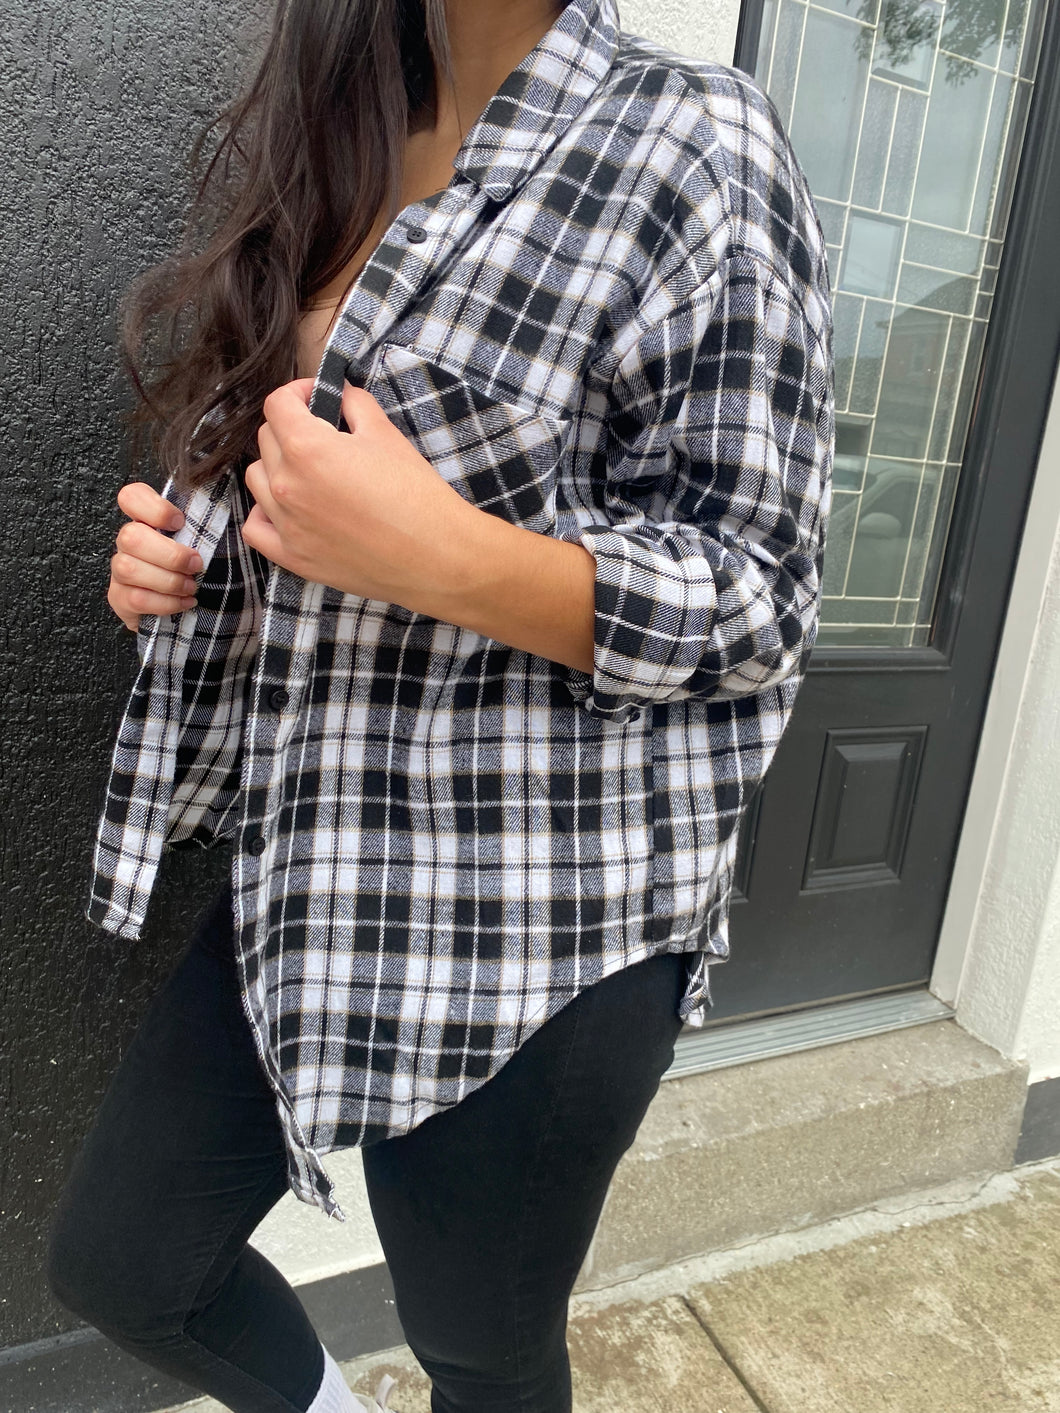 OVERSIZED PLAID FLANNEL SHIRT  IN BLACK